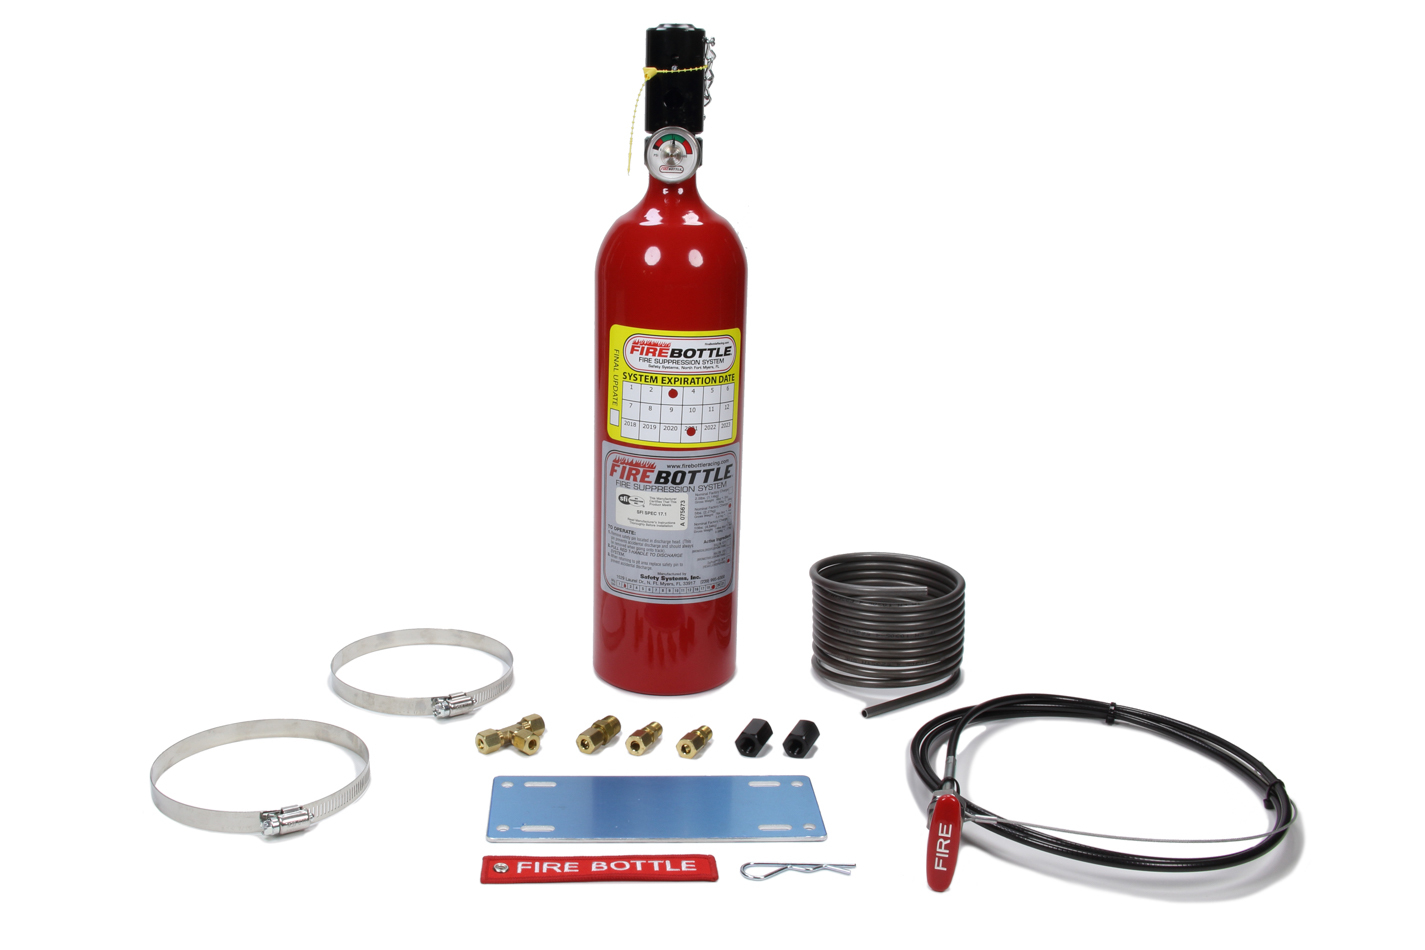 Safety Systems PRC-500 - Fire Suppression System, RC, Manual, FE-36, SFI Rated, 5.0 lb Bottle, Fittings / Hose / Mount / Pull Cable, Kit